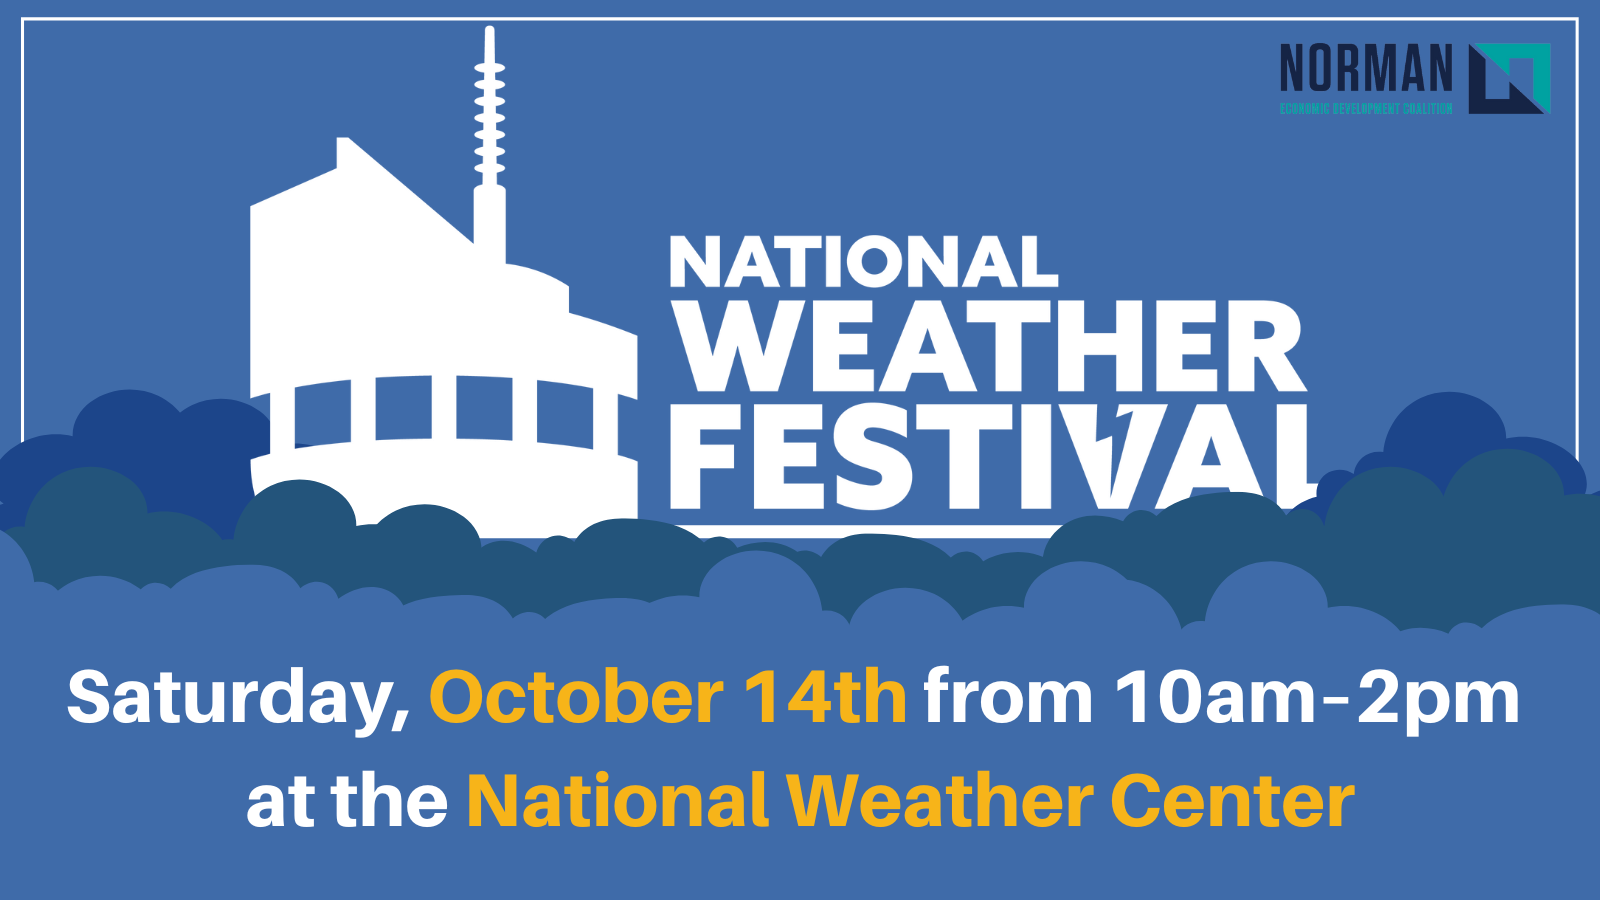 National Weather Festival 2022 | Saturday, October 29 from 10am to 2pm at the National Weather Center. There will be kids activities, food trucks, giveaways, local news stations, and weather baloon launches!